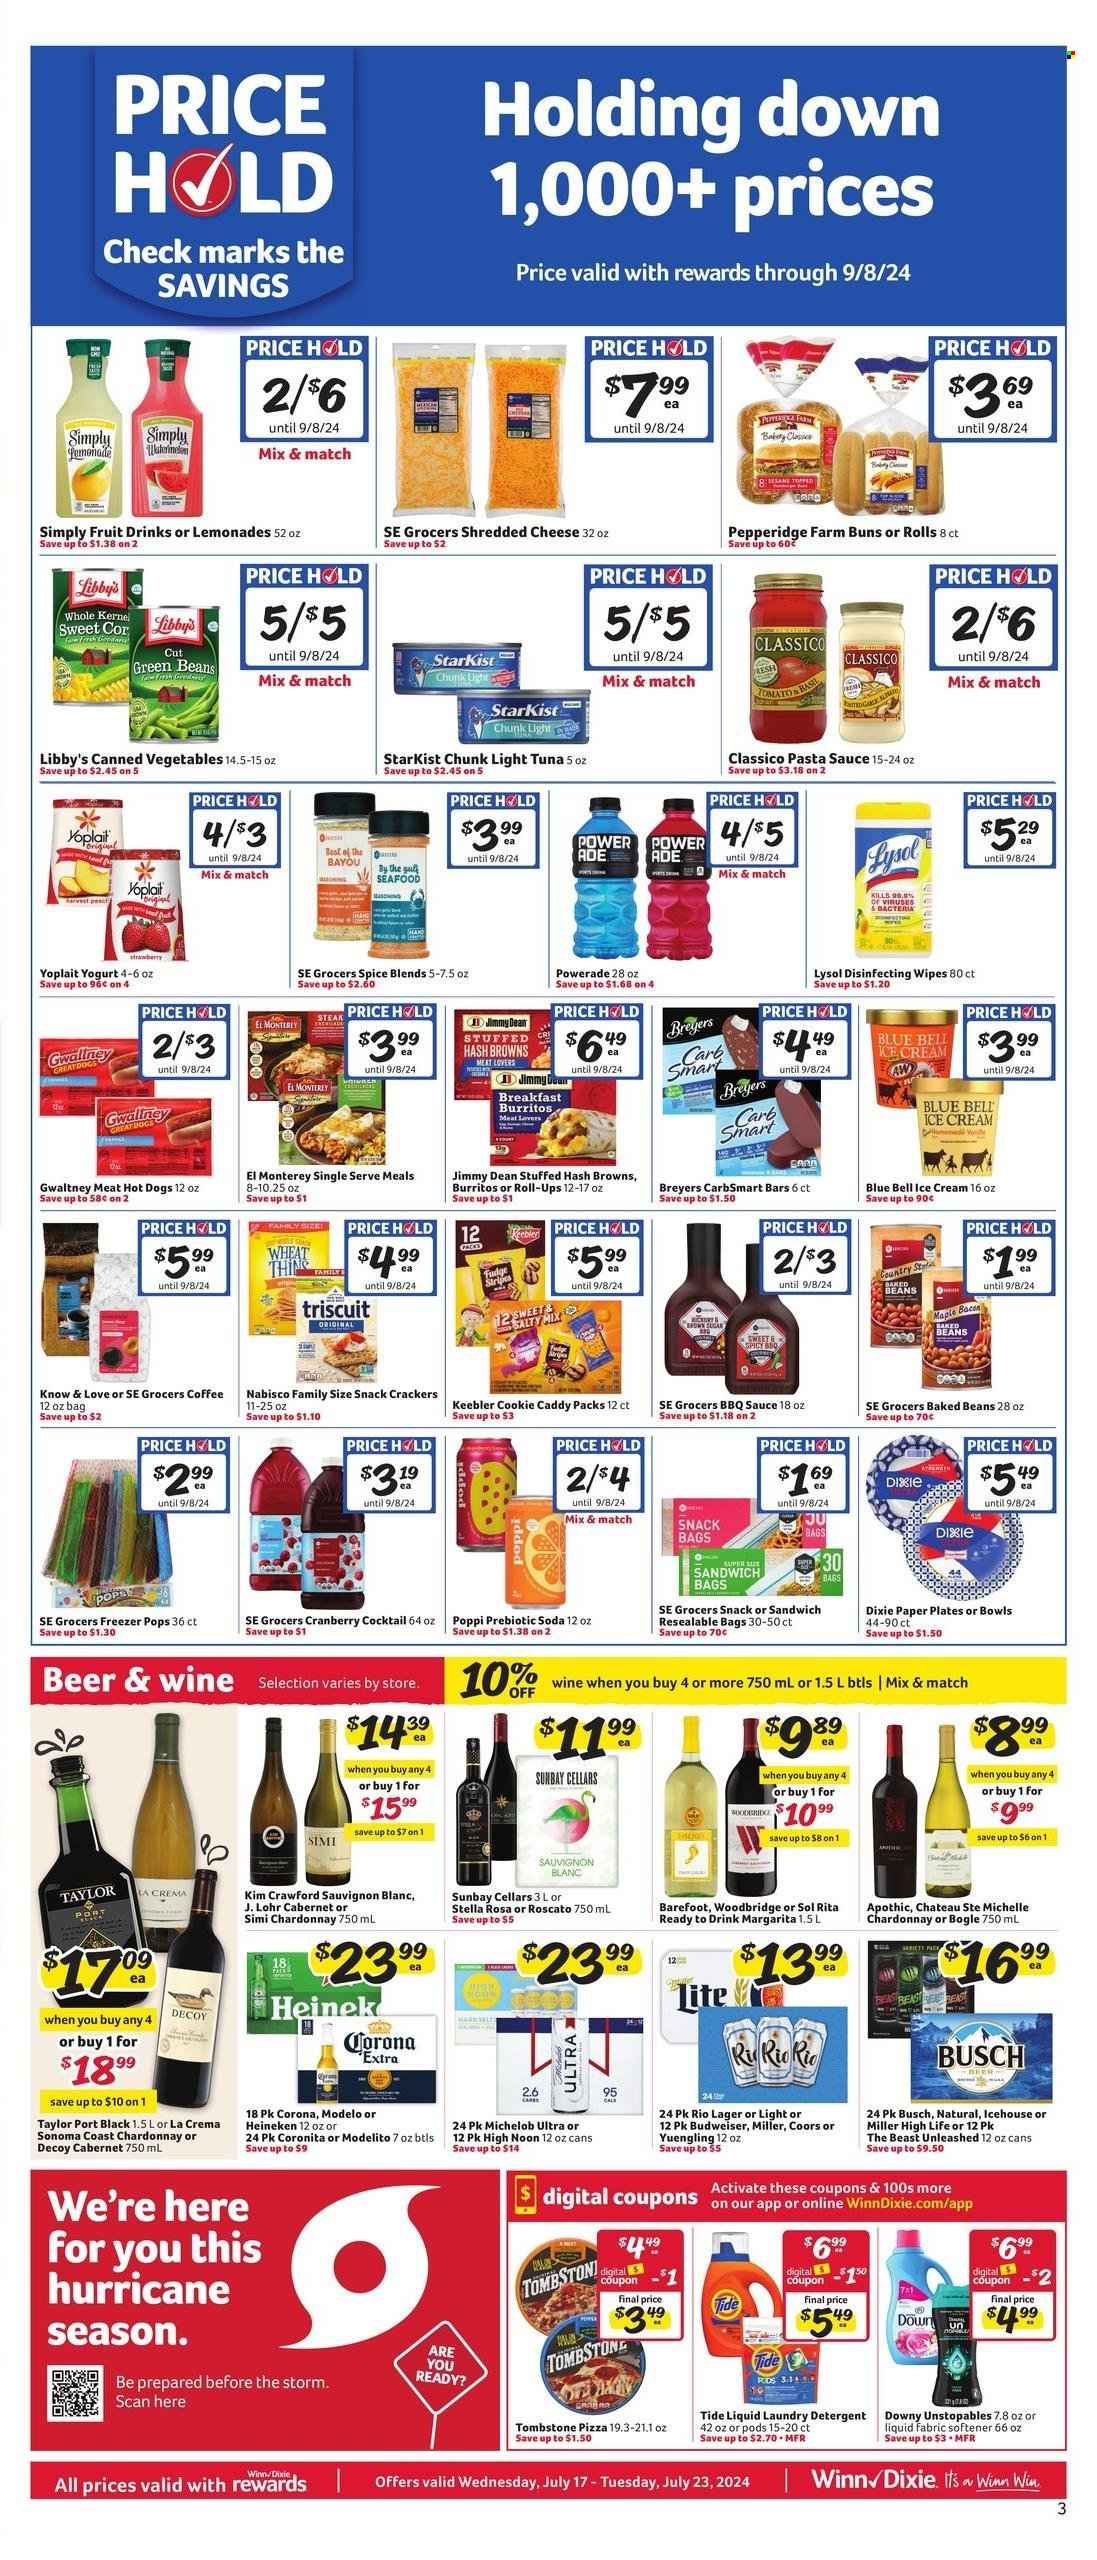 thumbnail - Winn Dixie Flyer - 07/17/2024 - 07/23/2024 - Sales products - Unstopables, scent booster, detergent, Tide, laundry detergent, white wine, Chardonnay, wine, alcohol, Sauvignon Blanc, Kim Crawford, beer, Budweiser, Miller, Lager, Coors, Yuengling, Busch, Woodbridge, ready to drink spirits, Corona Extra, Heineken, Modelo, fruit drink, ready meal, snack, plate, bowl, paper plate, paper bowl, Dixie, ice cream bars, crackers, Nabisco, beans, baked beans, Bogle, tuna, StarKist, canned tuna, light tuna, canned fish, Powerade, energy drink, cleansing wipes, wipes, Lysol, ice cream, Blue Bell, canned vegetables, buns, pasta sauce, spaghetti sauce, sauce, Classico, spice, lemonade, shredded cheese, cheese, burrito, Jimmy Dean, hash browns, coffee, hot dog, BBQ sauce, pizza, Hard Seltzer, Michelob, soda, cookies, Keebler, sweets, yoghurt, Yoplait. Page 5.